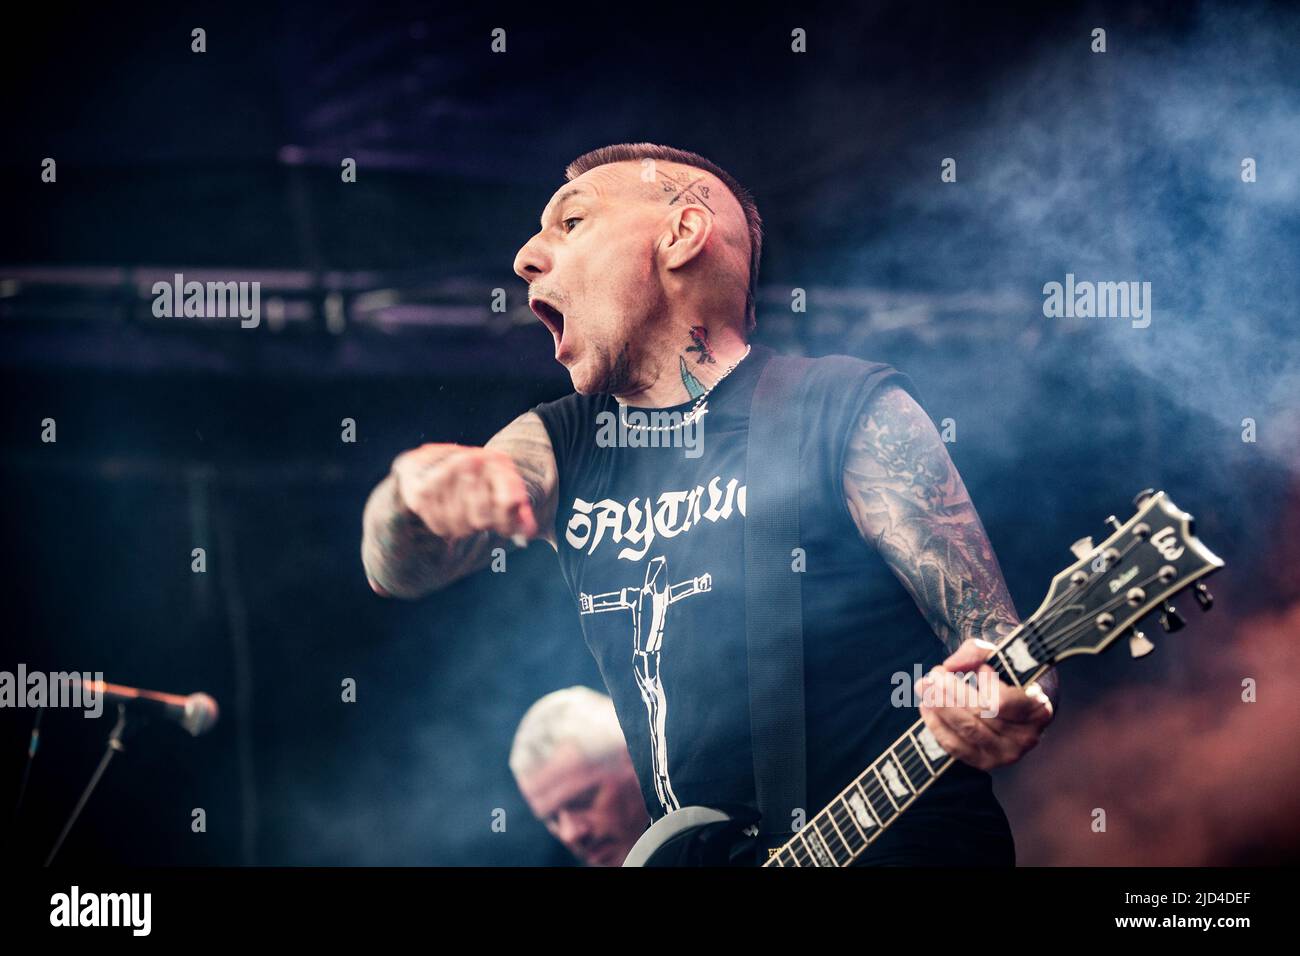 Copenhagen, Denmark. 17th June, 2022. The American hardcore punk band Agnostic Front performs a live concert during the Danish heavy metal festival Copenhell 2022 in Copenhagen. Here guitarist Vinnie Stigma is seen live on stage. (Photo Credit: Gonzales Photo/Alamy Live News Stock Photo